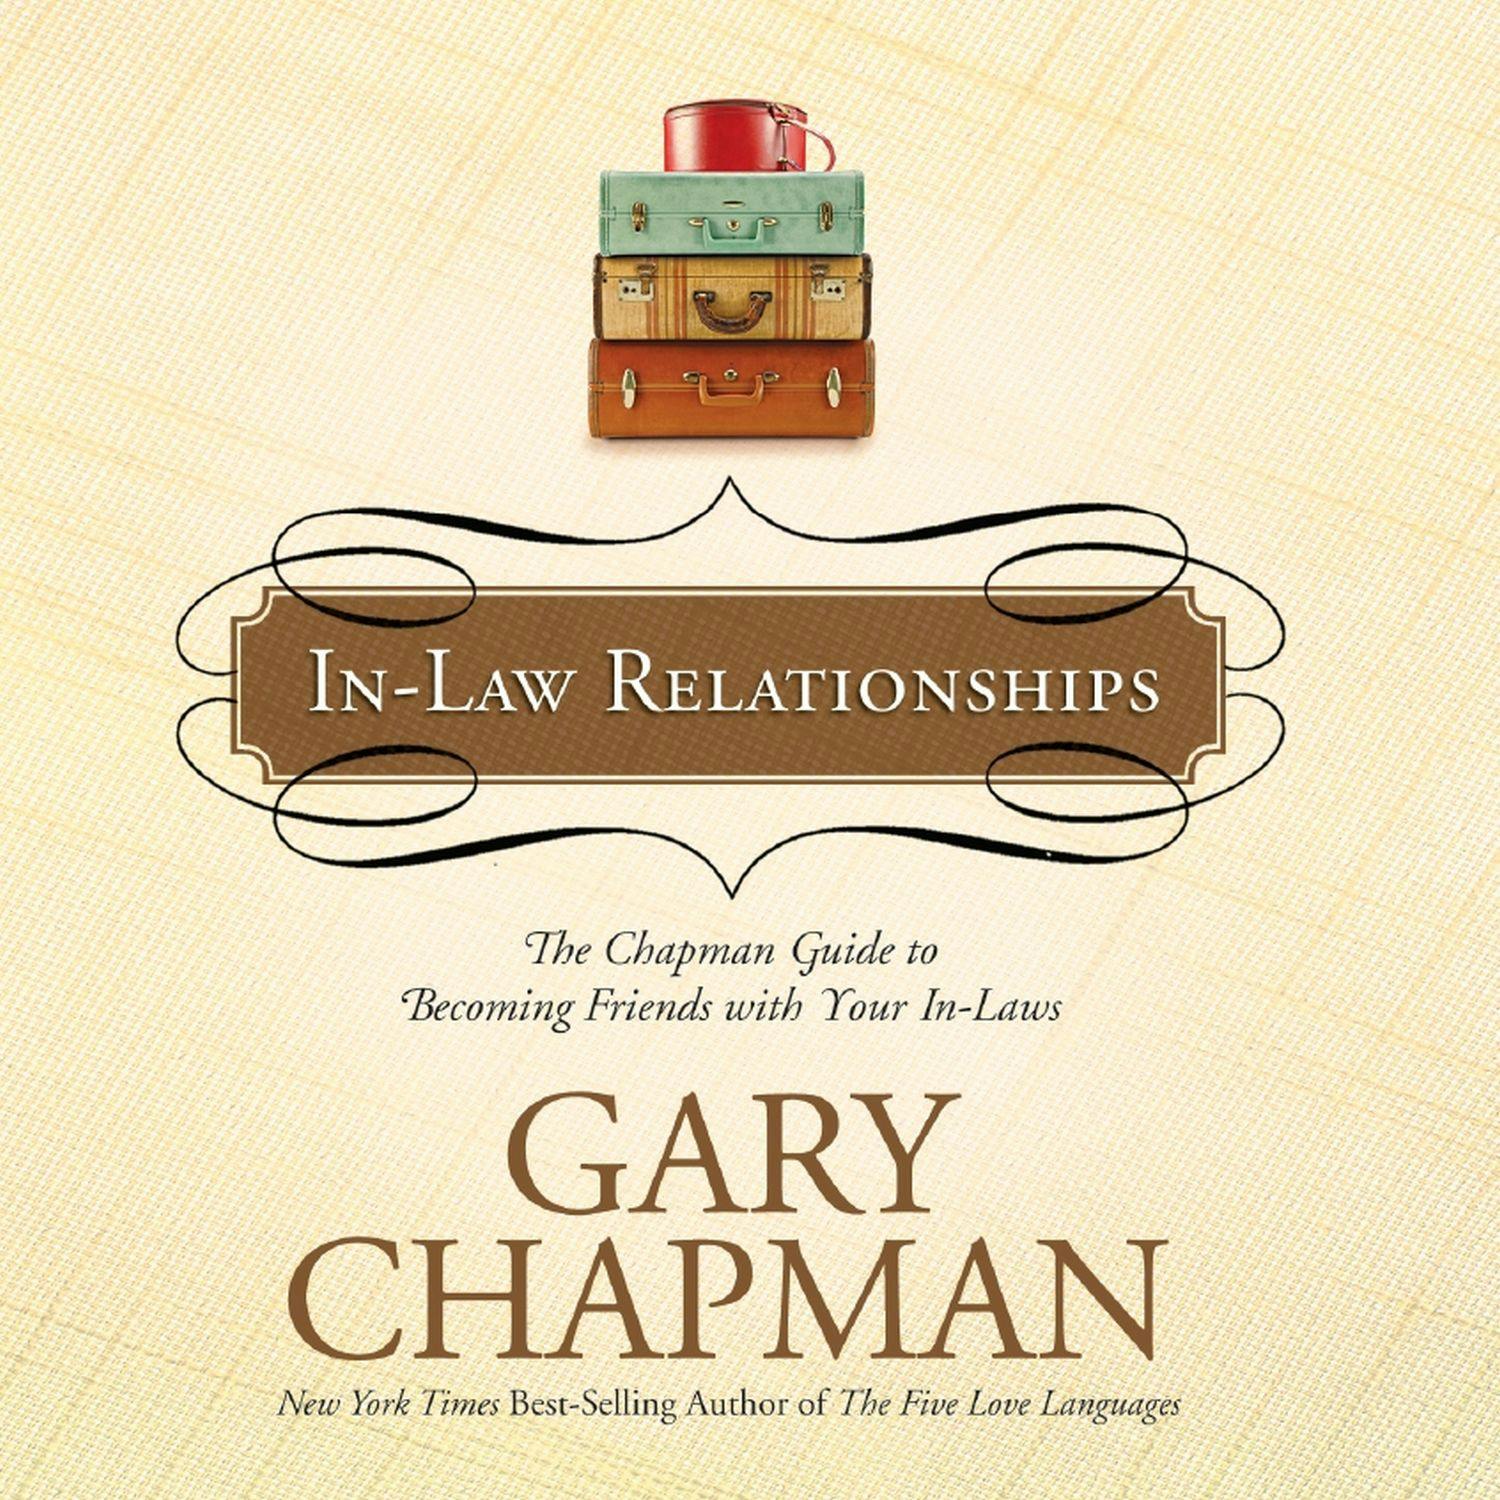 In-Law Relationships: The Chapman Guide to Becoming Friends with Your In-Laws - Gary Chapman